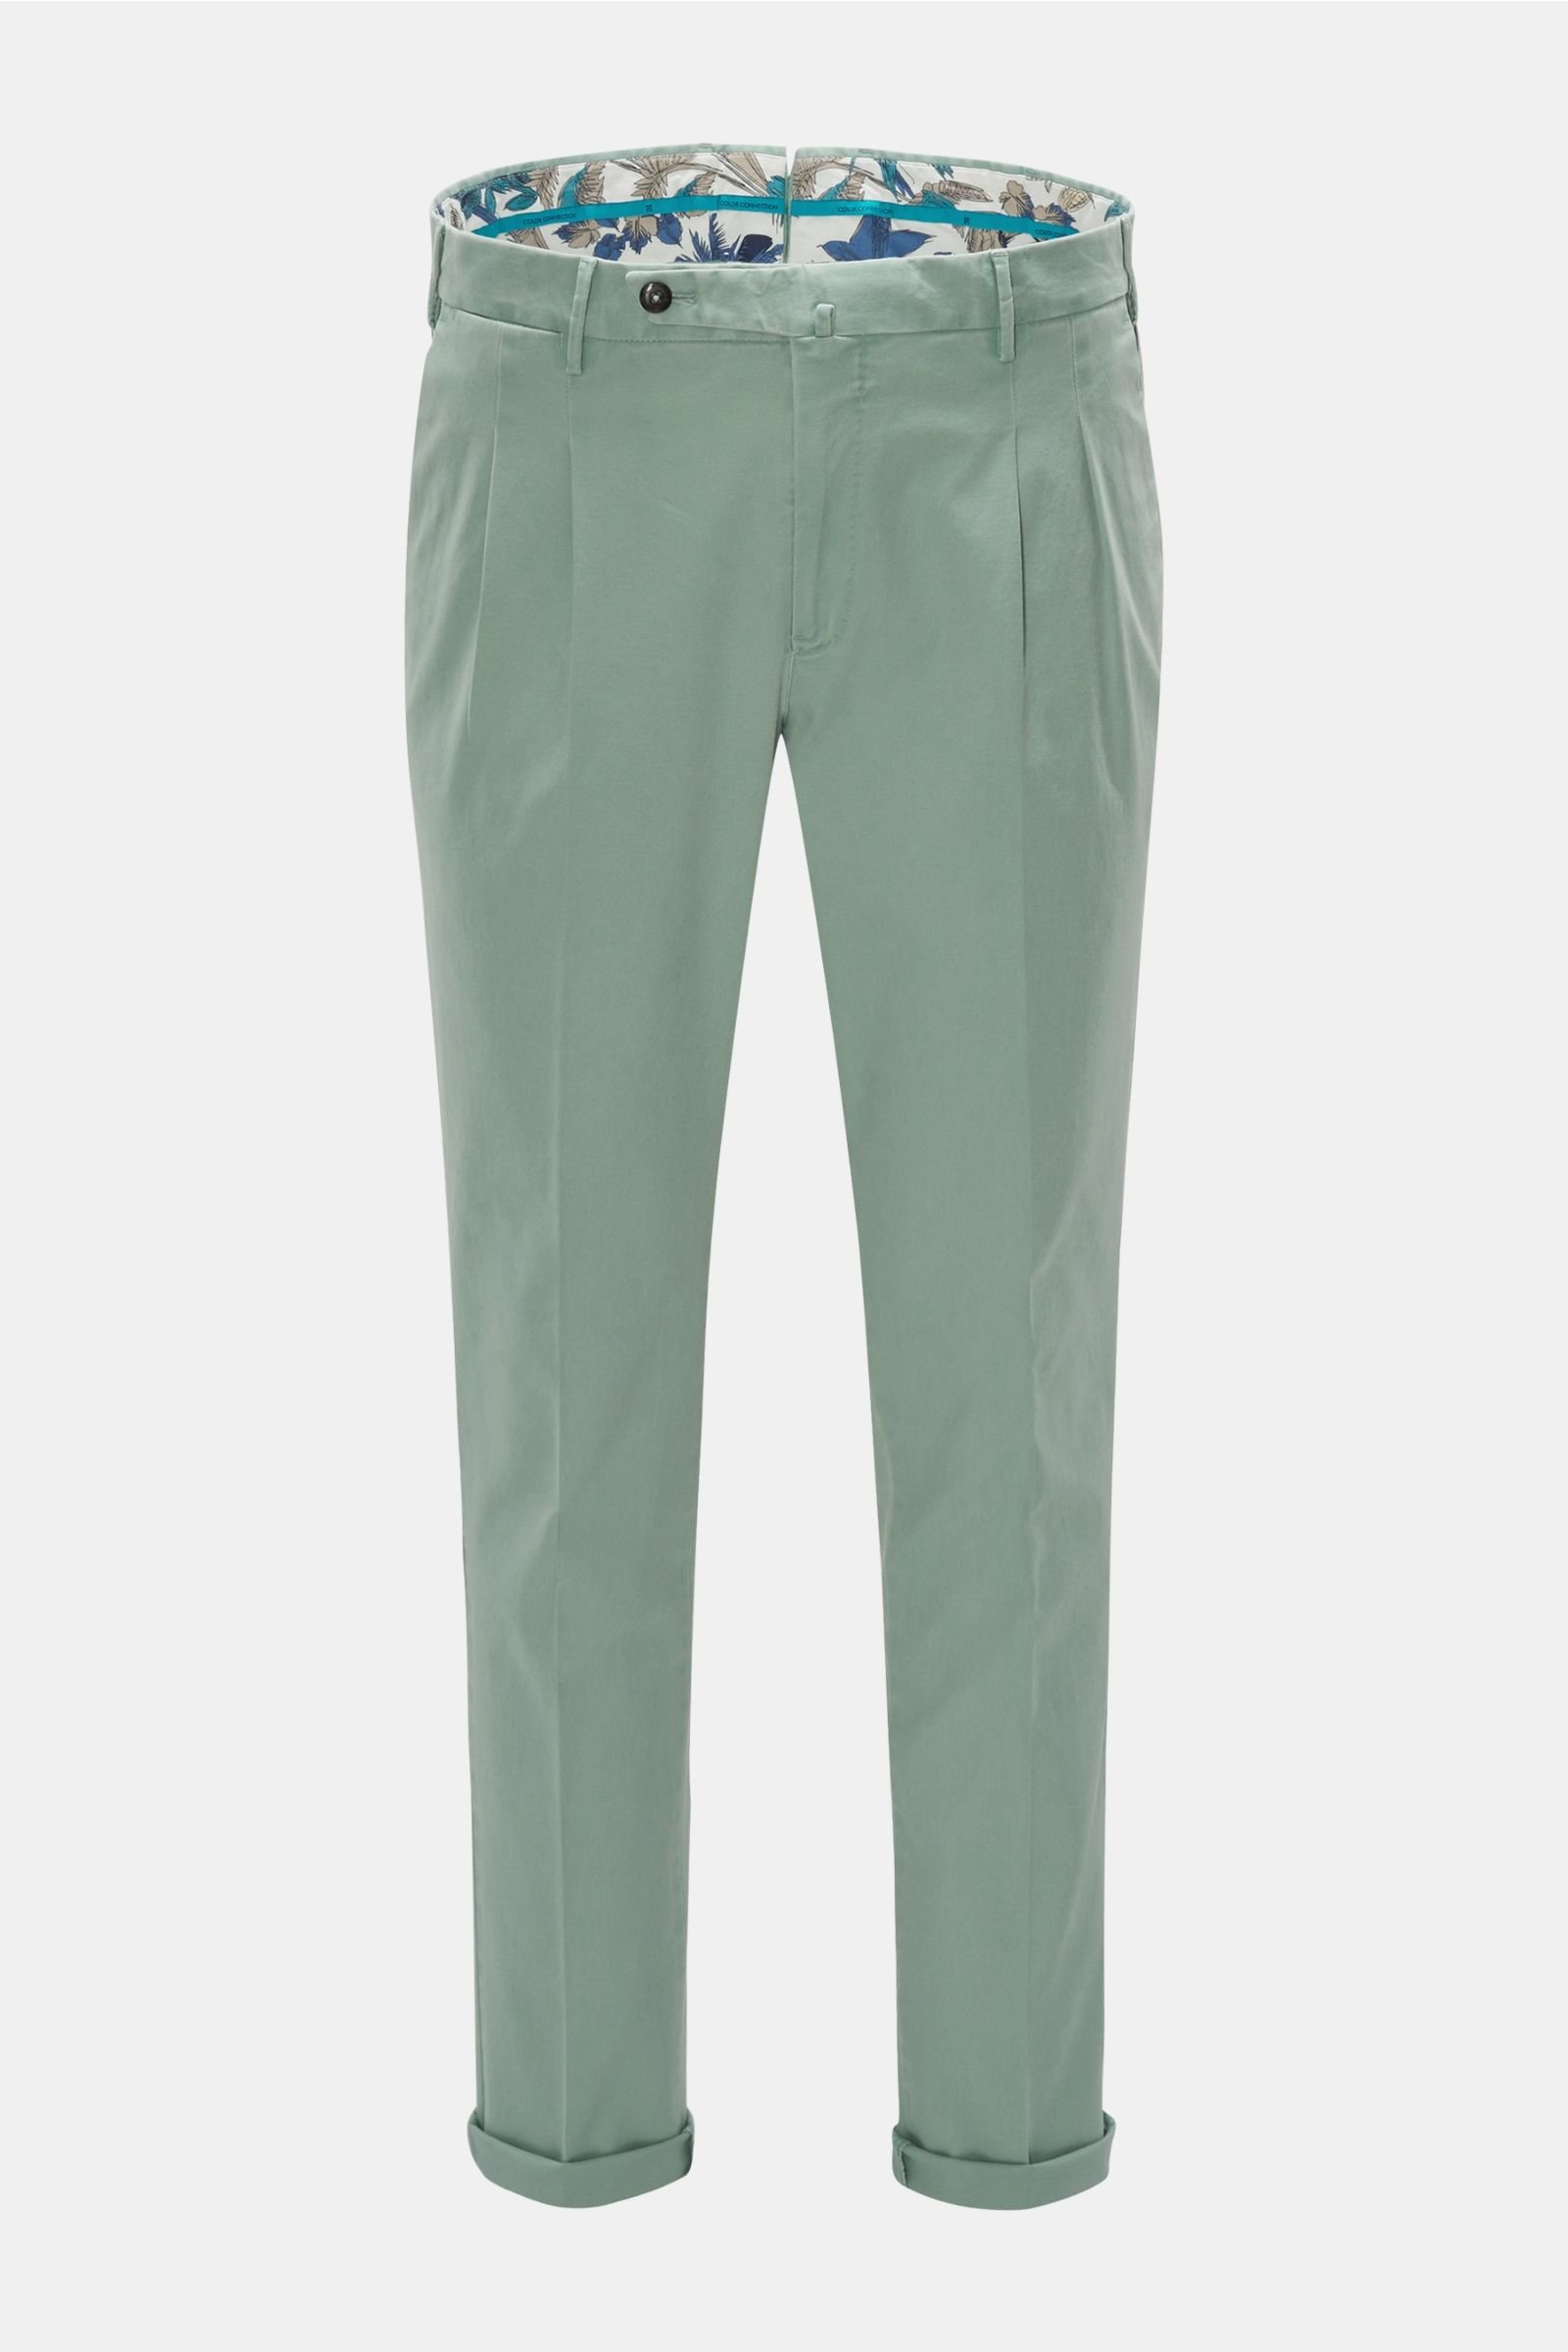 Chinos 'Preppy Fit' mint green